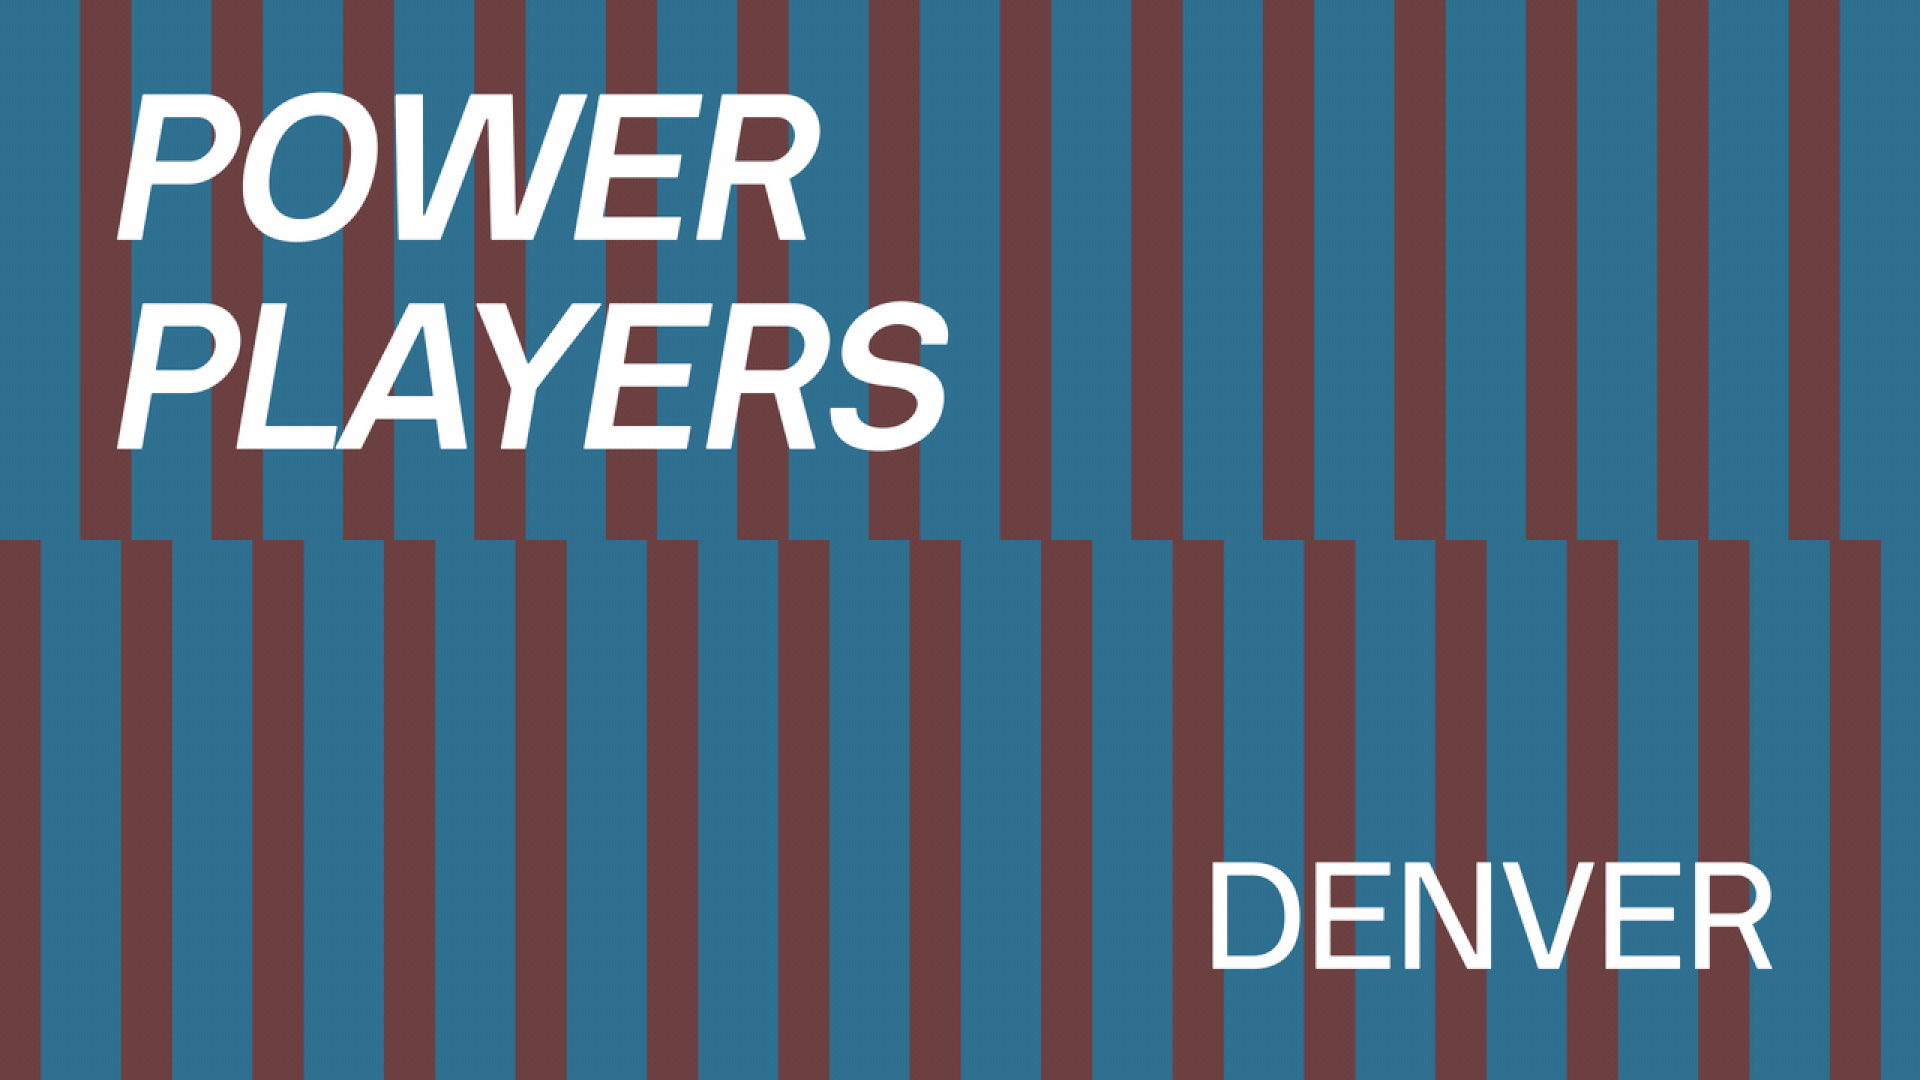 Illustration of two rows of dominos falling with text overlaid that reads Power Players Denver.